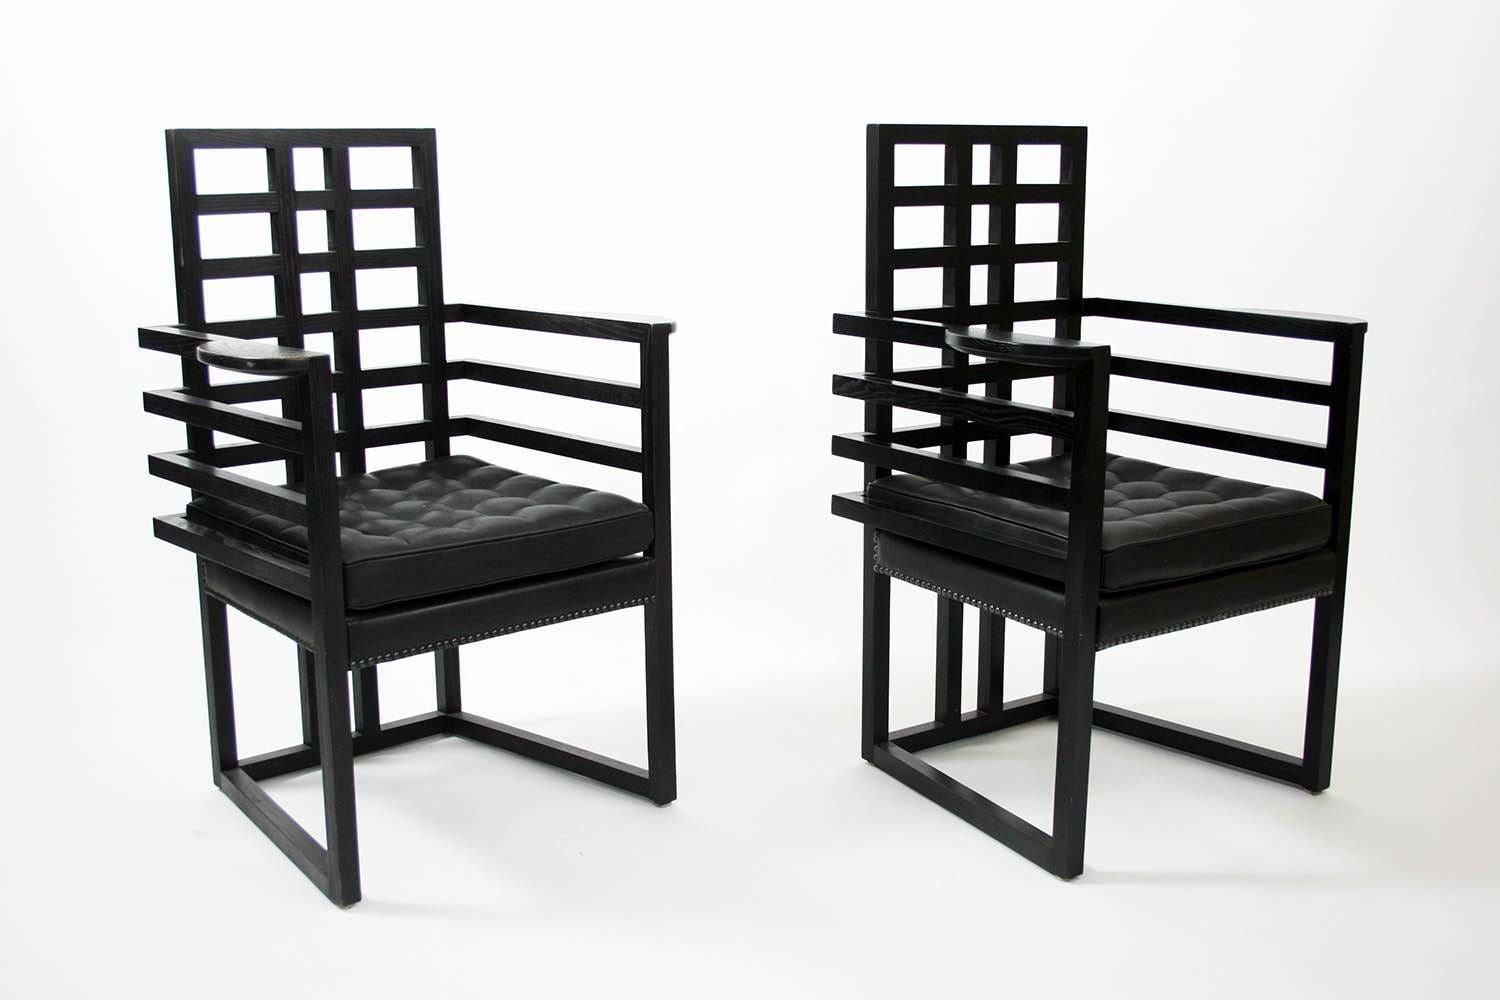 Early 20th Century Pair of Josef Hoffmann Armloffel Chairs Made by Wittmann